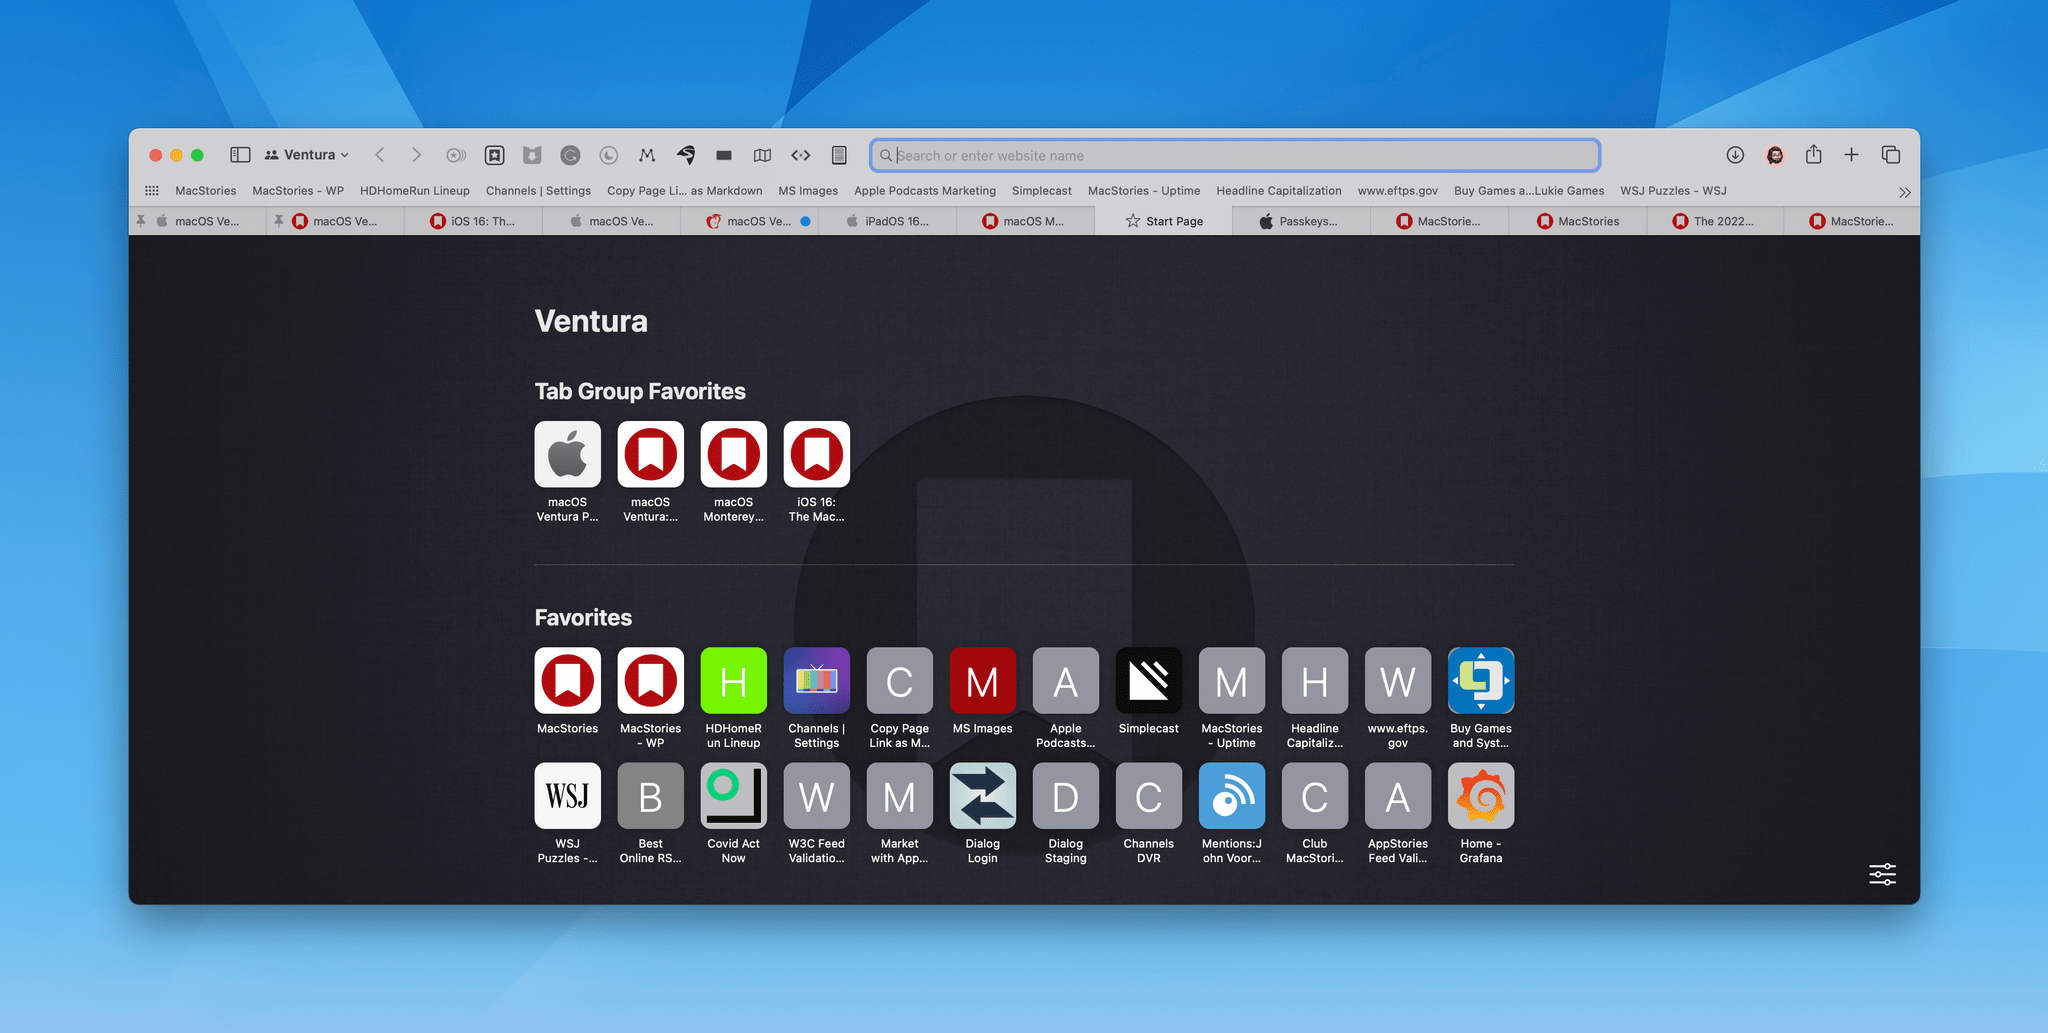 My Ventura review tab group has its own set of favorites and a unique wallpaper to make it easy to spot visually.